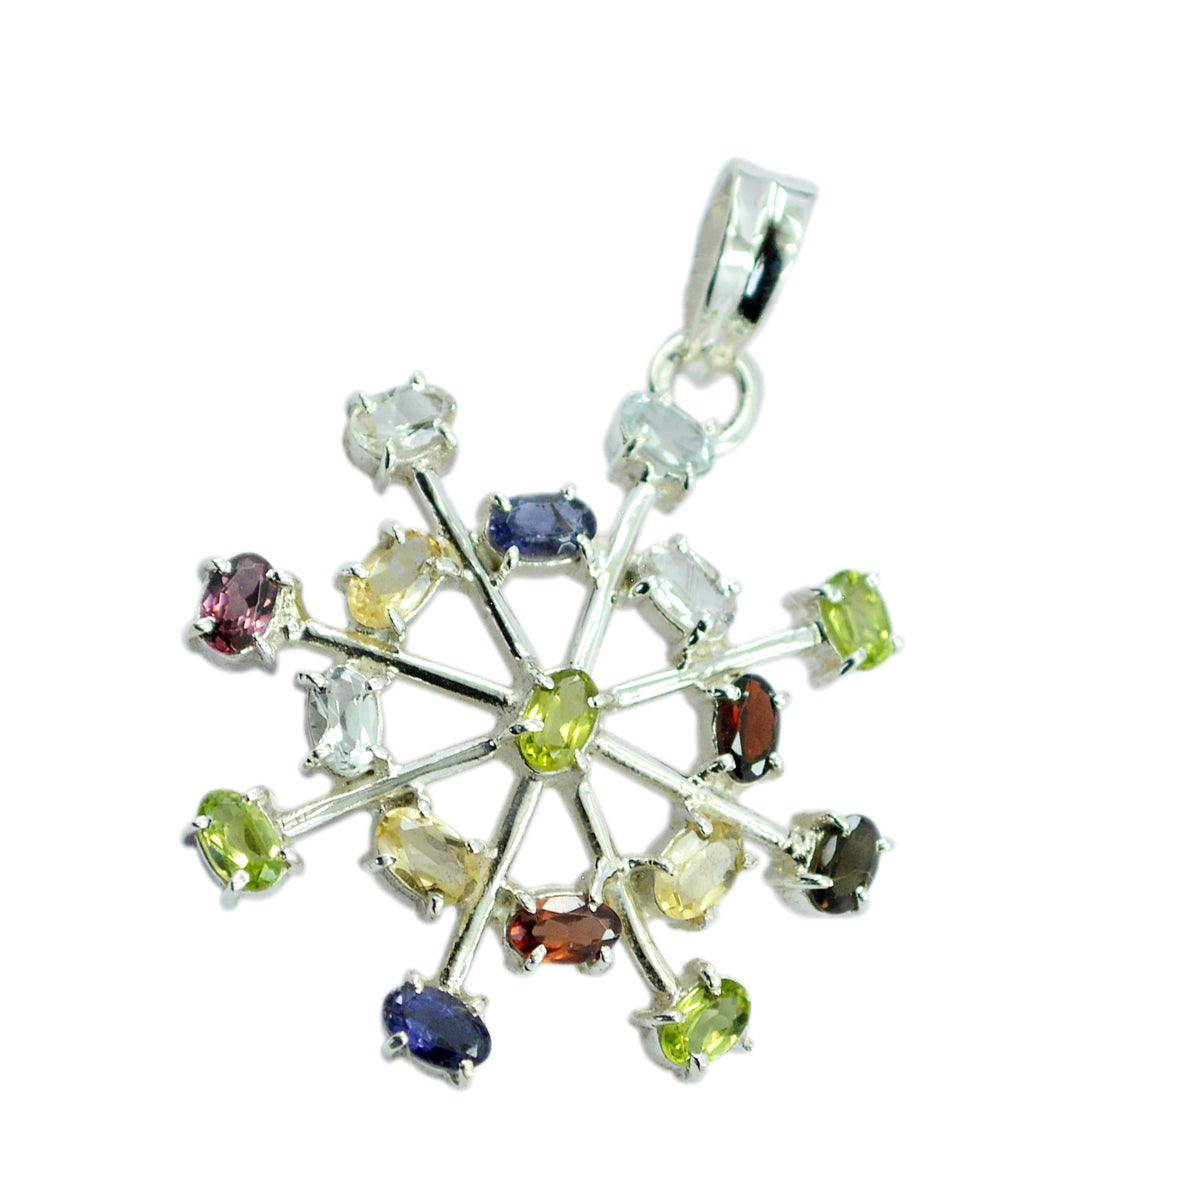 Riyo Beauteous Gems Oval Faceted Multi Color Multi Stone Solid Silver Pendant Gift For Easter Sunday